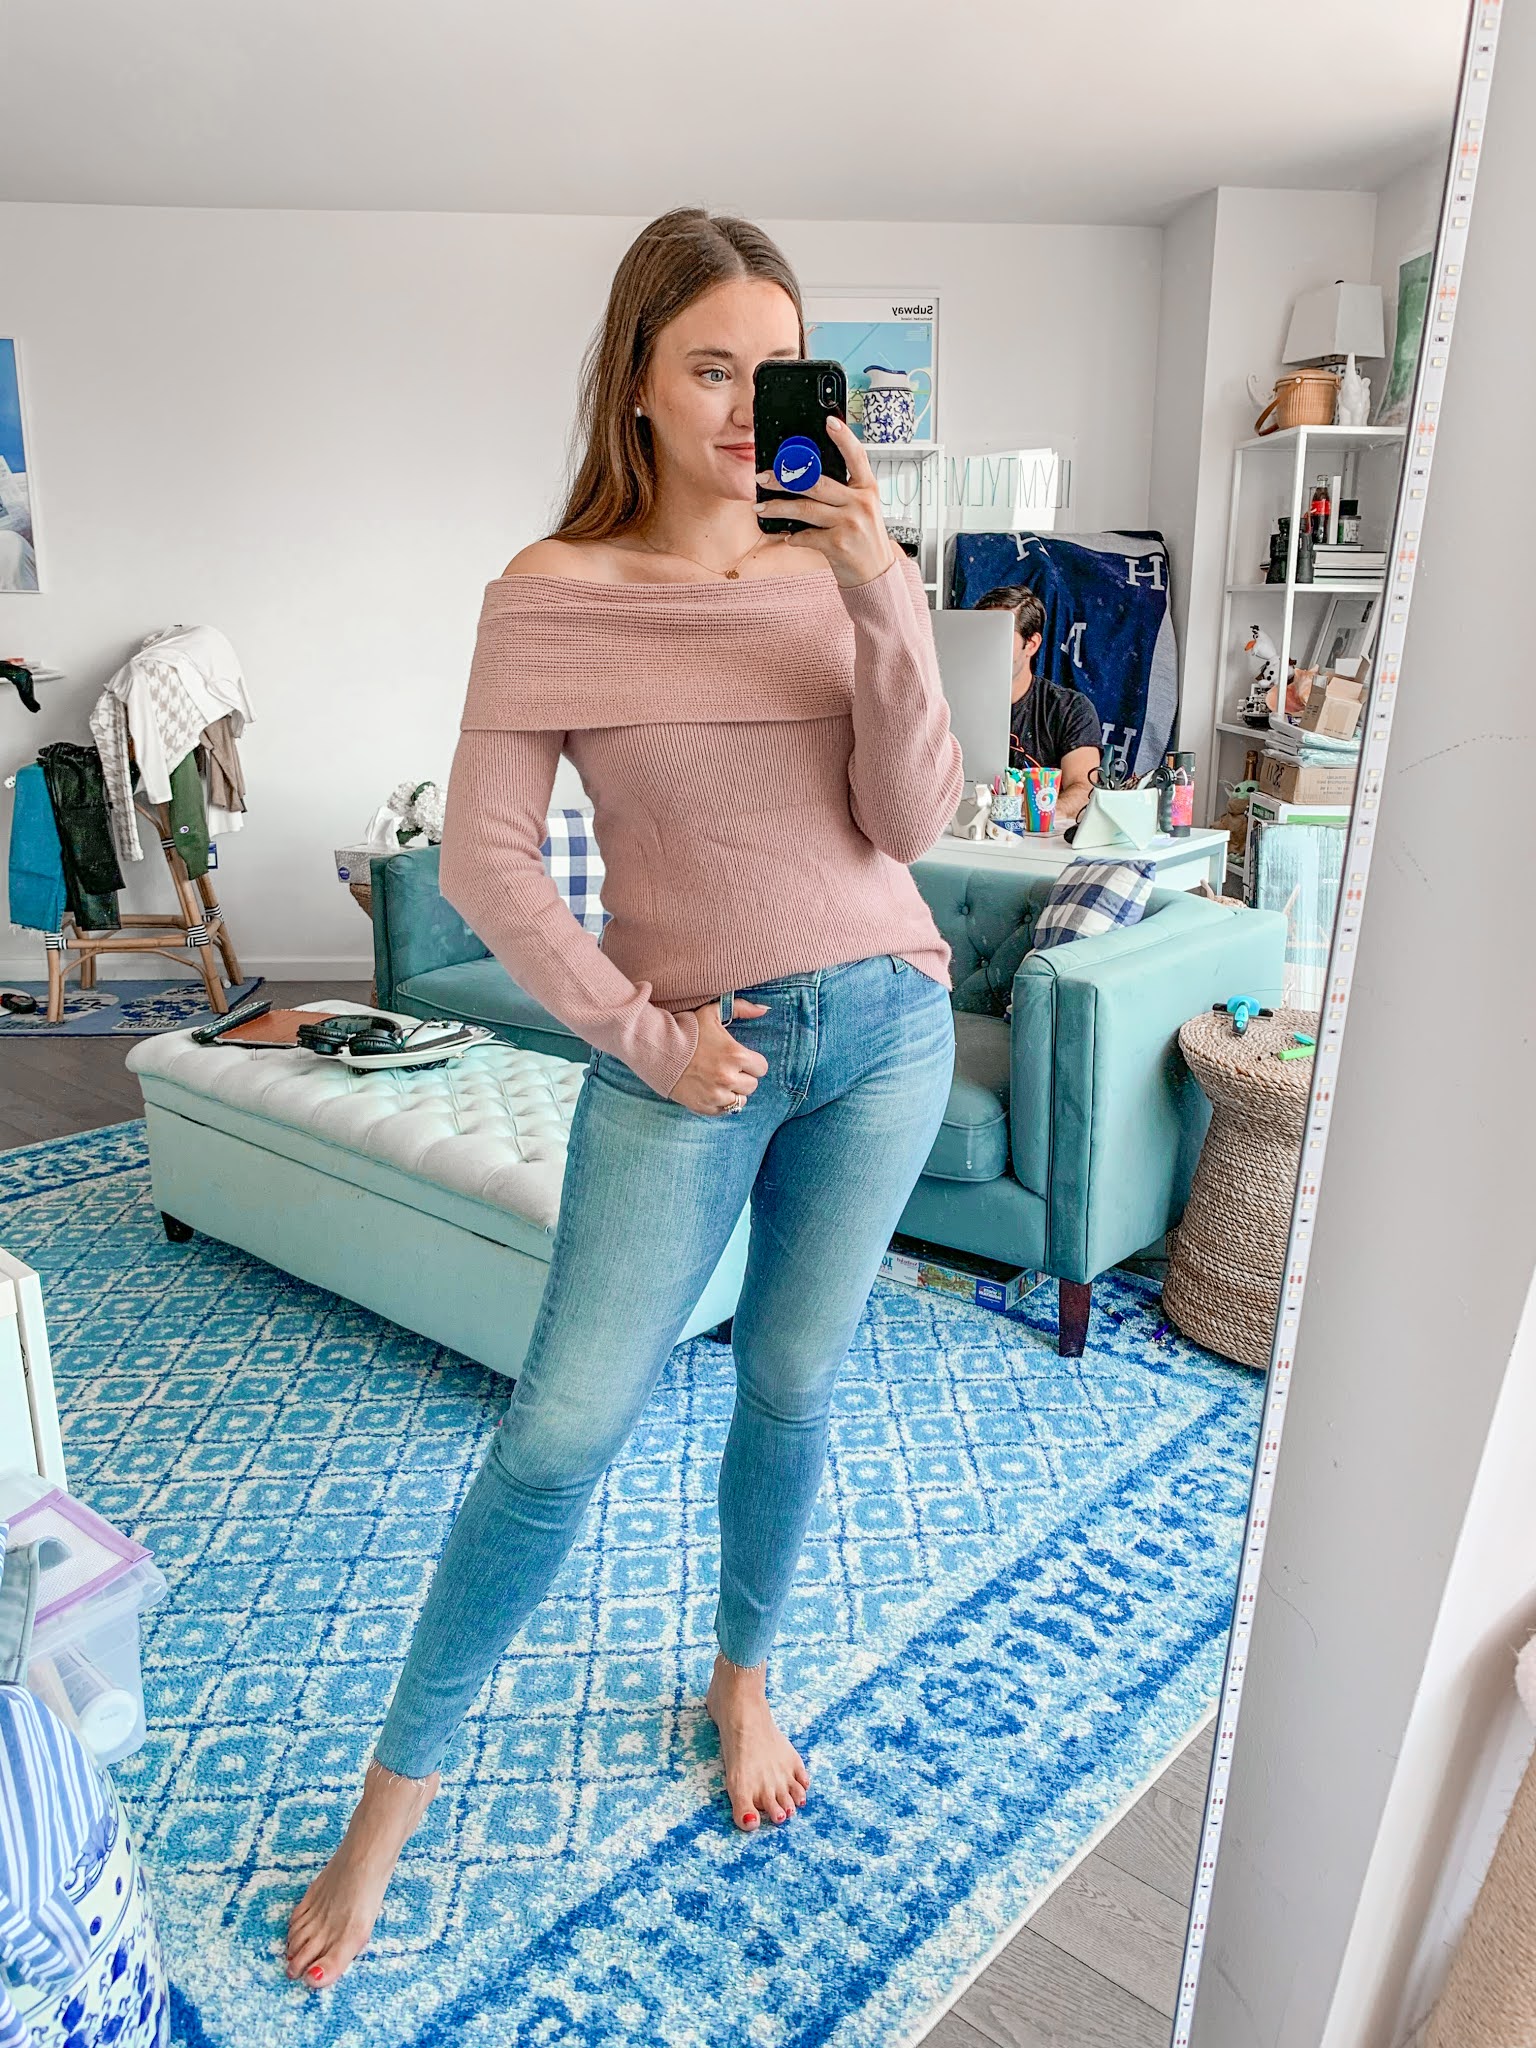 Nordstrom Anniversary Sale Try On Haul + Review, Connecticut Fashion and  Lifestyle Blog